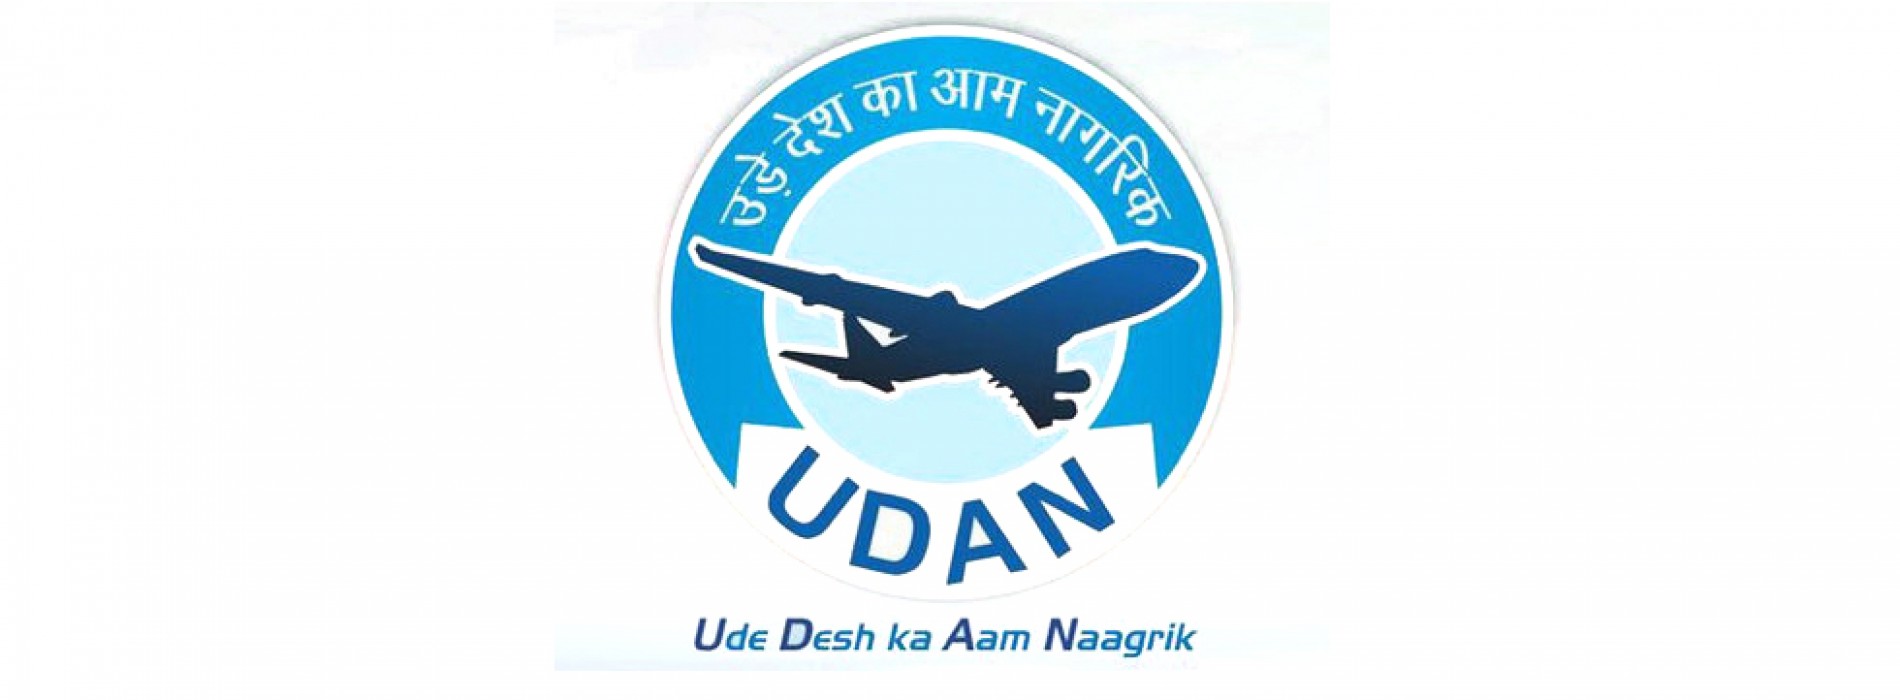 Civil aviation ministry may face funding crunch for UDAN